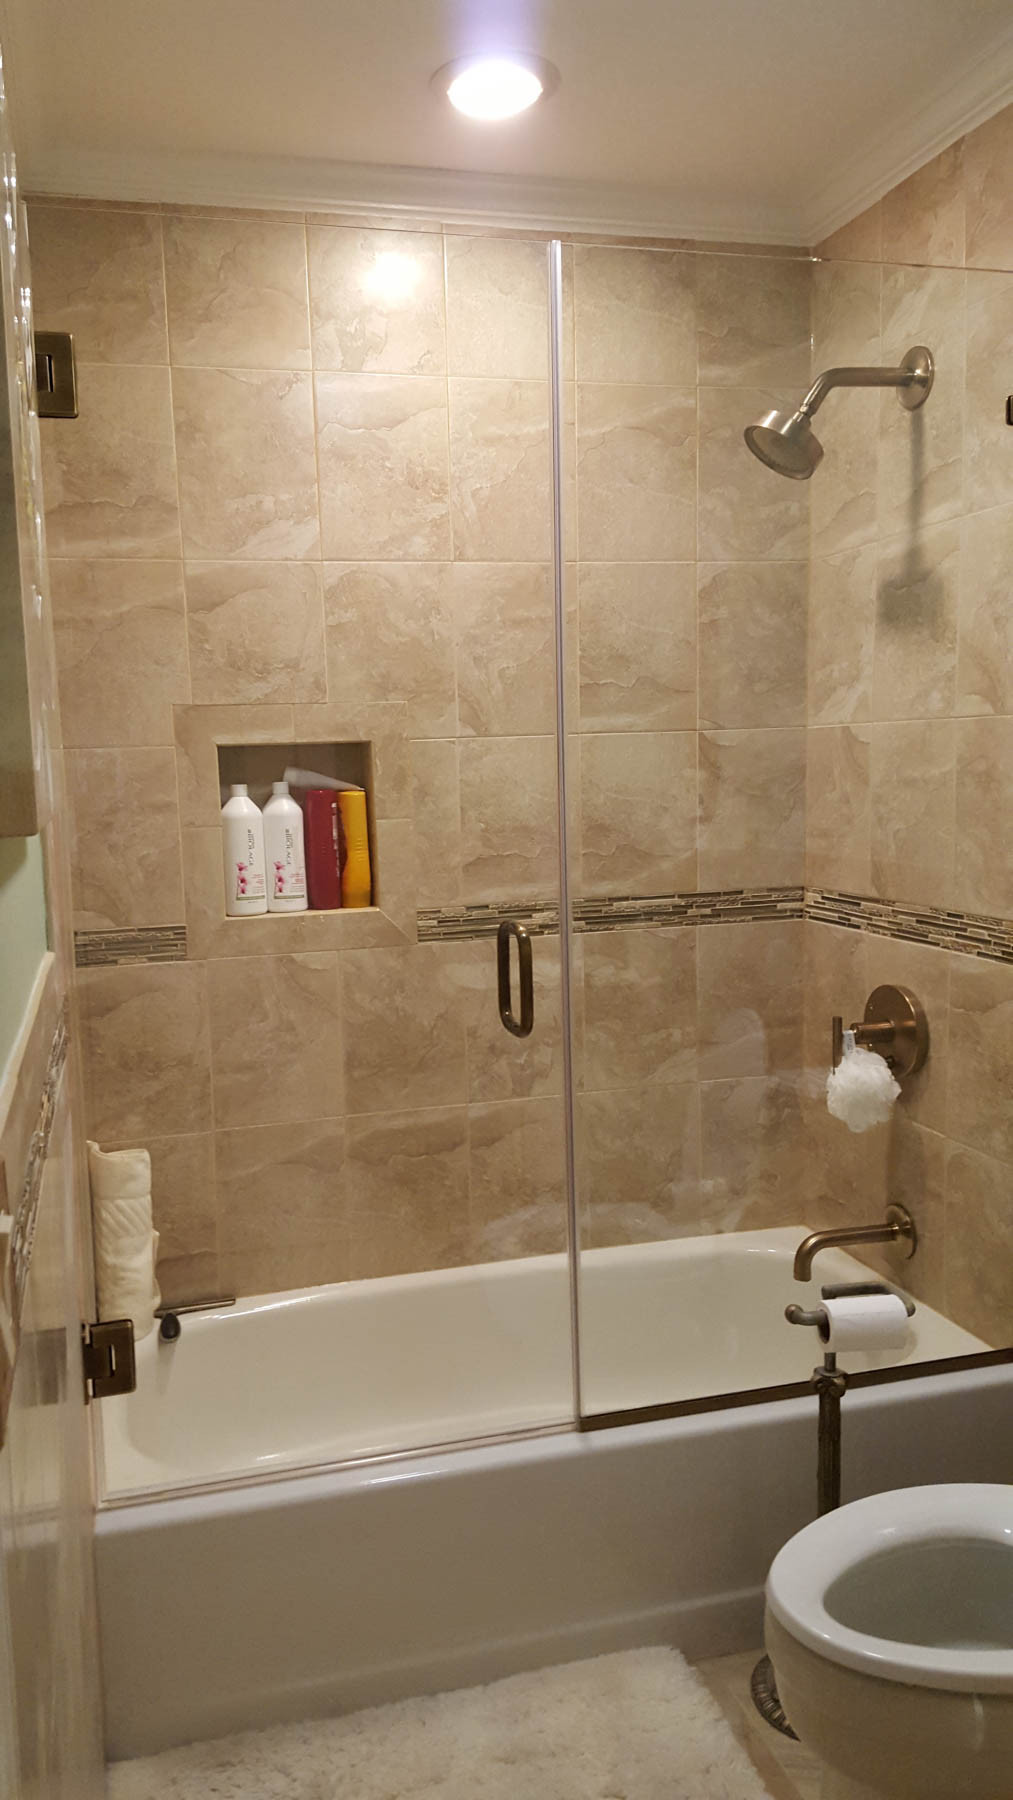 Bathroom Showers And Tubs
 Tub Showers Doors in New Jersey